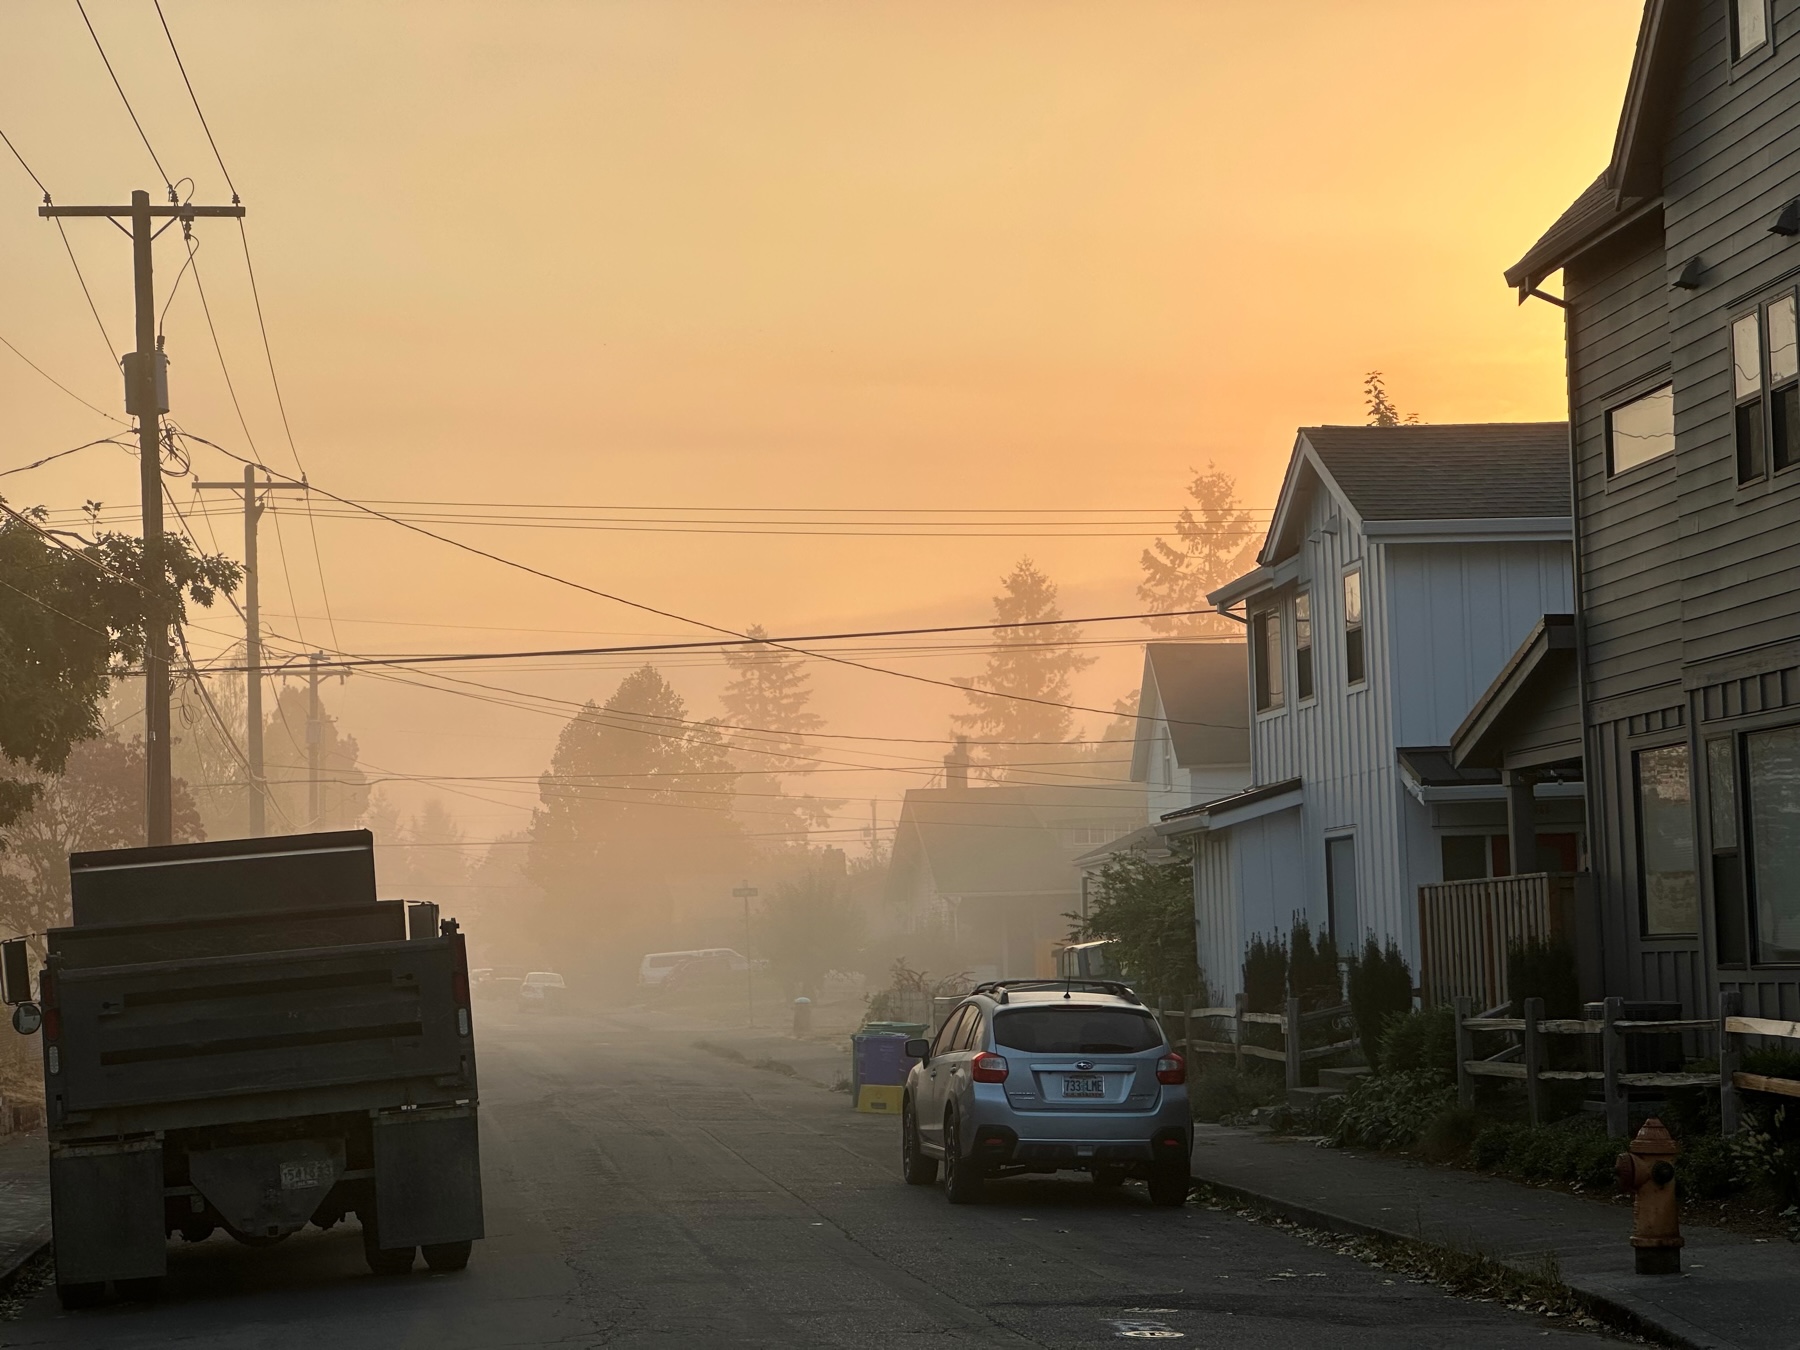 Foggy street view with the sky lit by orange light of the rising Sun.